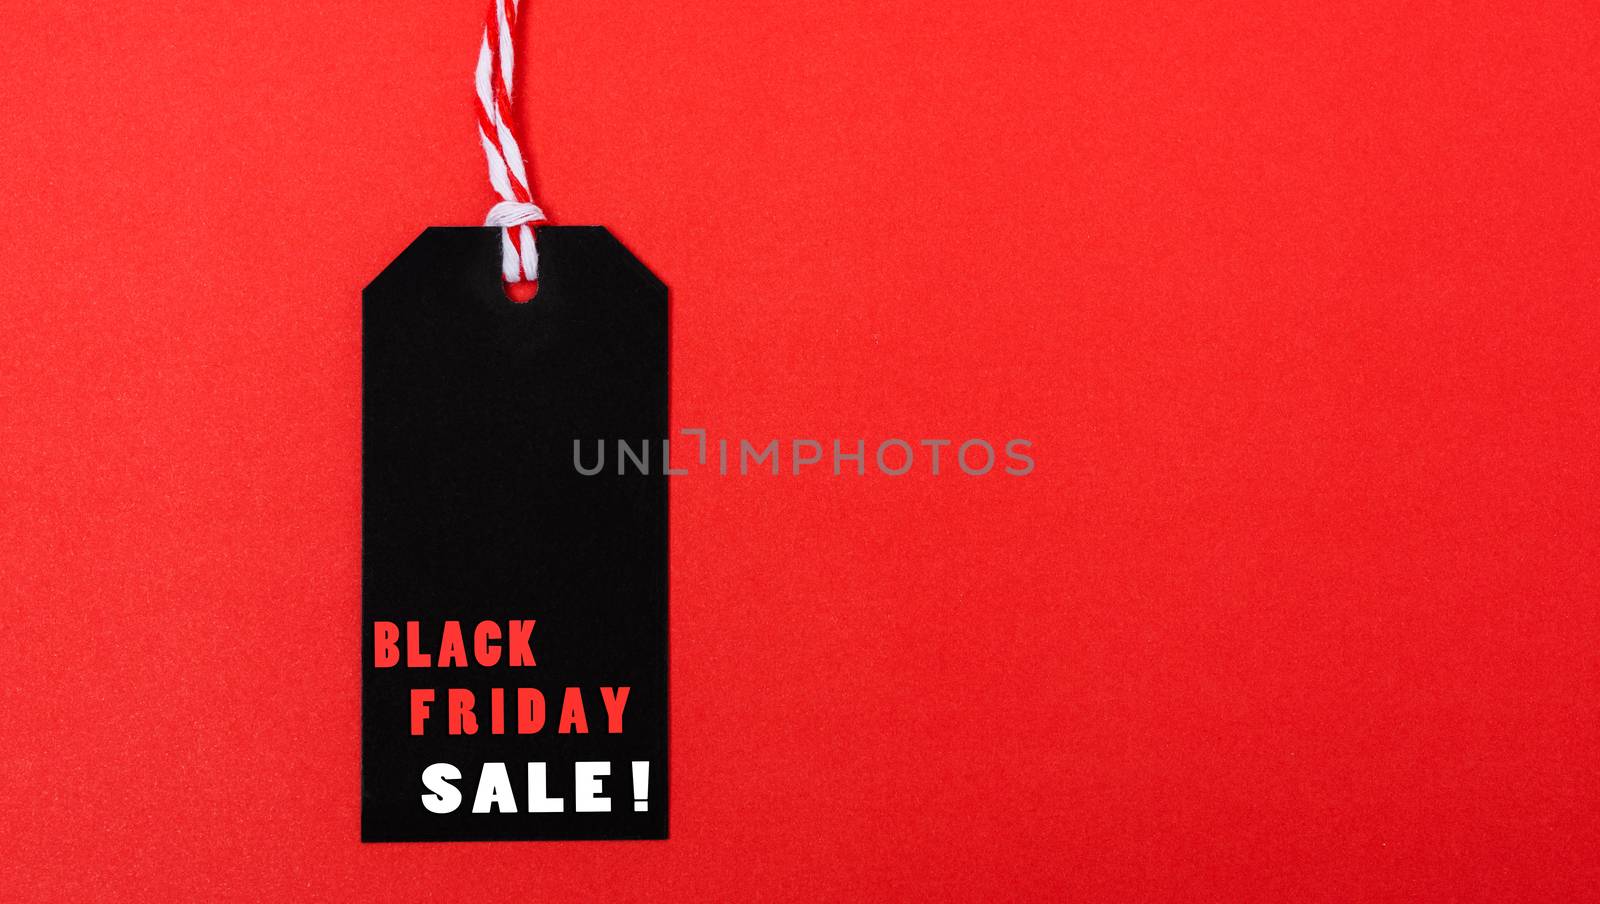 Online shopping, Promotion Black Friday Sale text on black tag by Sorapop